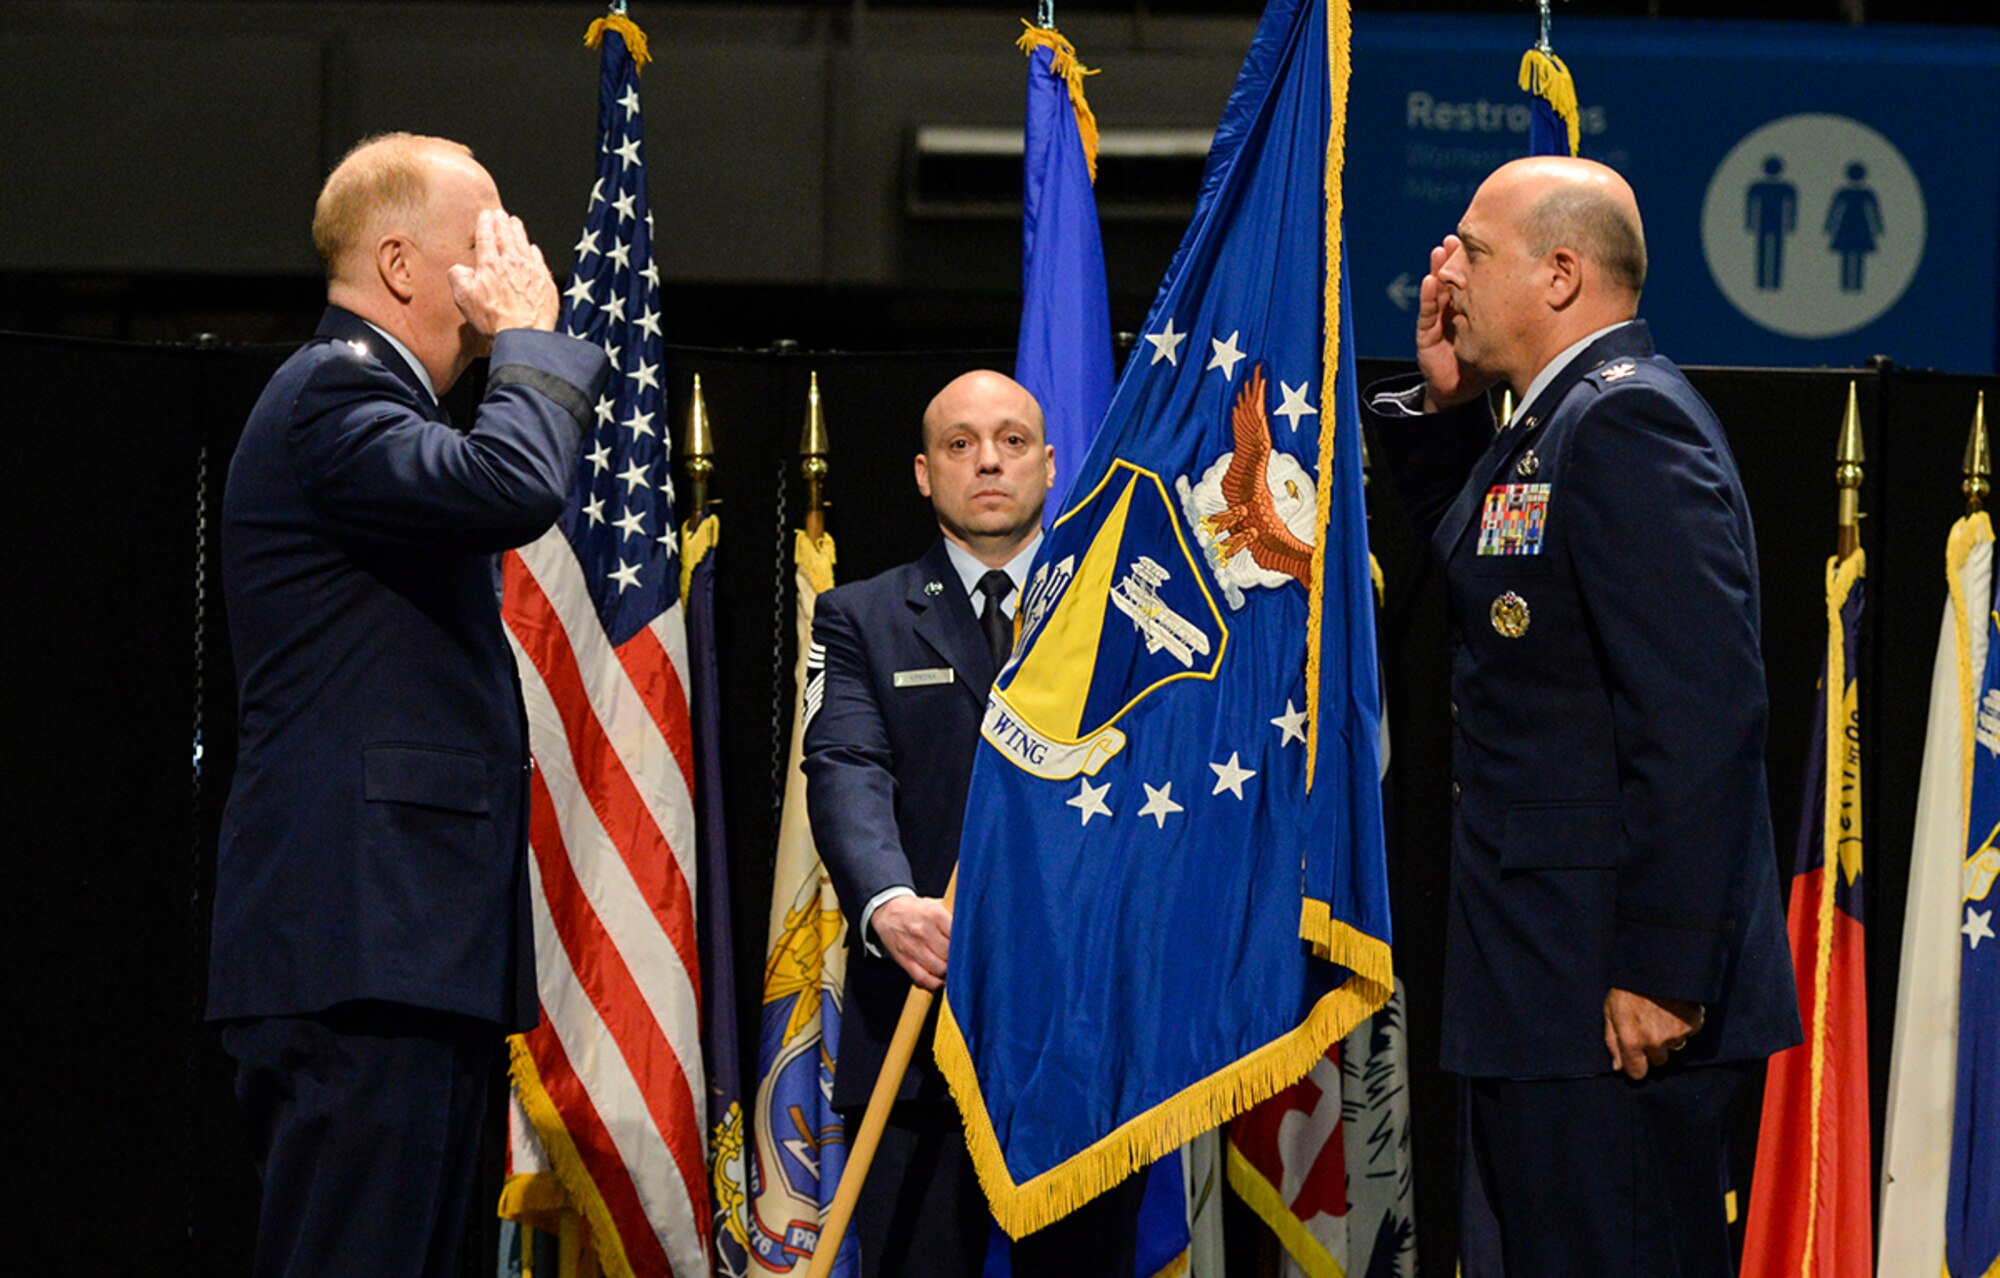 Col. Patrick Miller assumes command of the 88th Air Base Wing from Lt. Gen. Robert McMurry, Air Force Life Cycle Management Center commander, during a change of command ceremony inside the National Museum of the United States Air Force at Wright-Patterson Air Force Base on June 12. U.S. AIR FORCE PHOTO/WESLEY FARNSWORTH